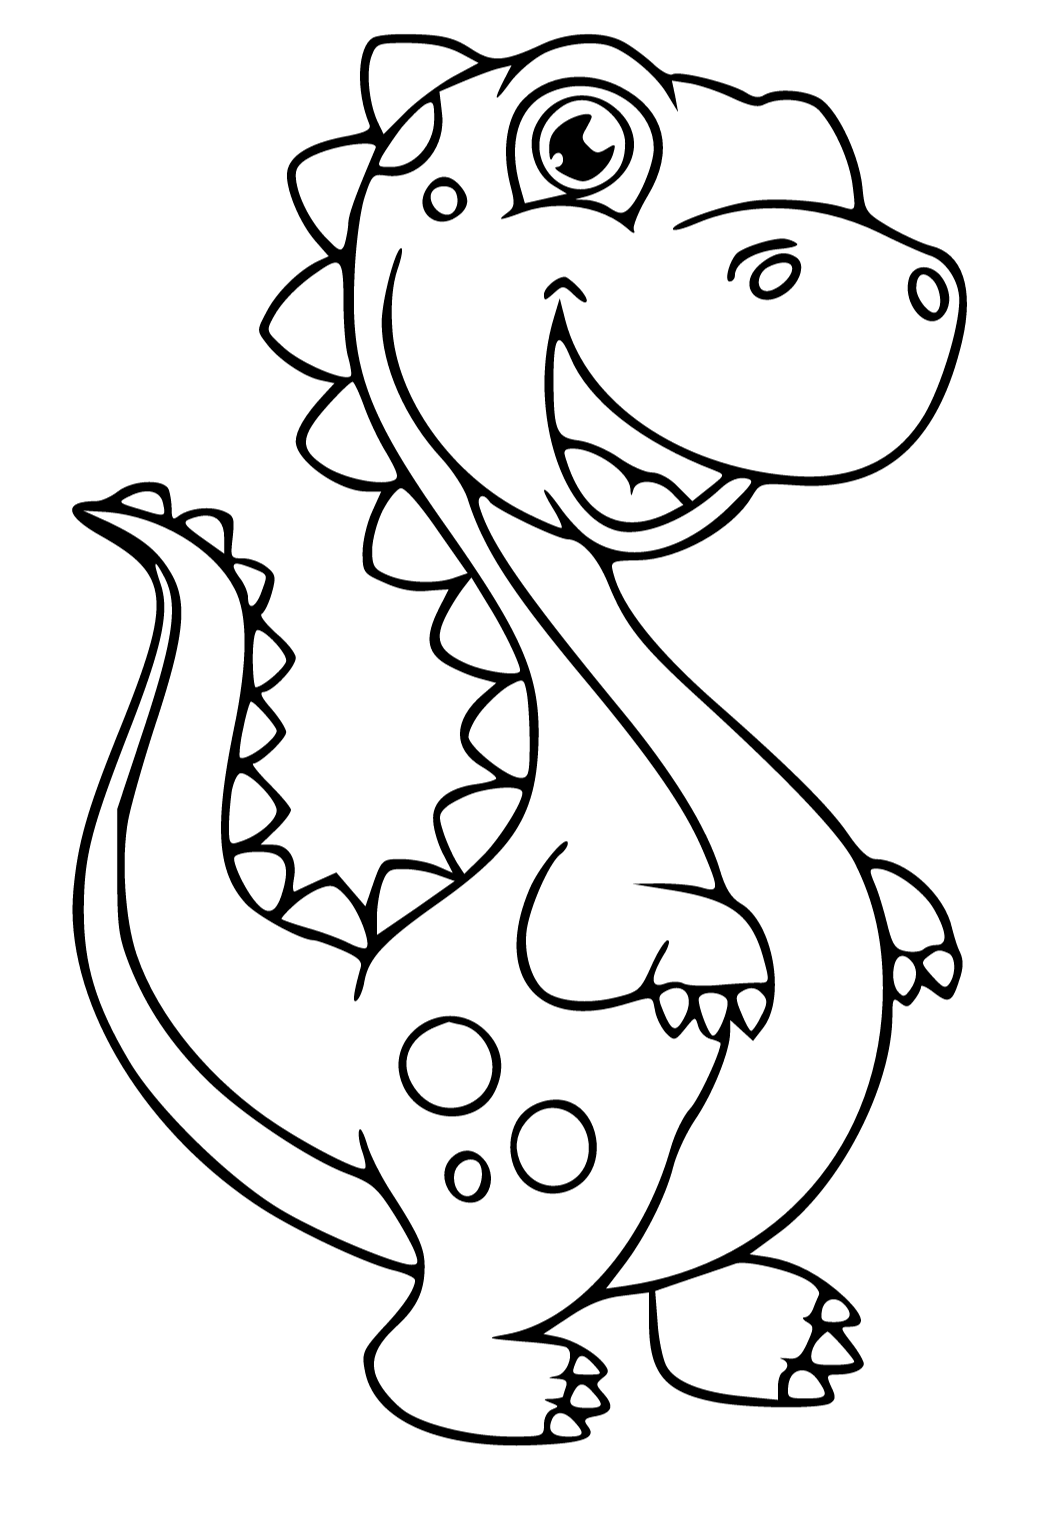 hard dragon coloring pages